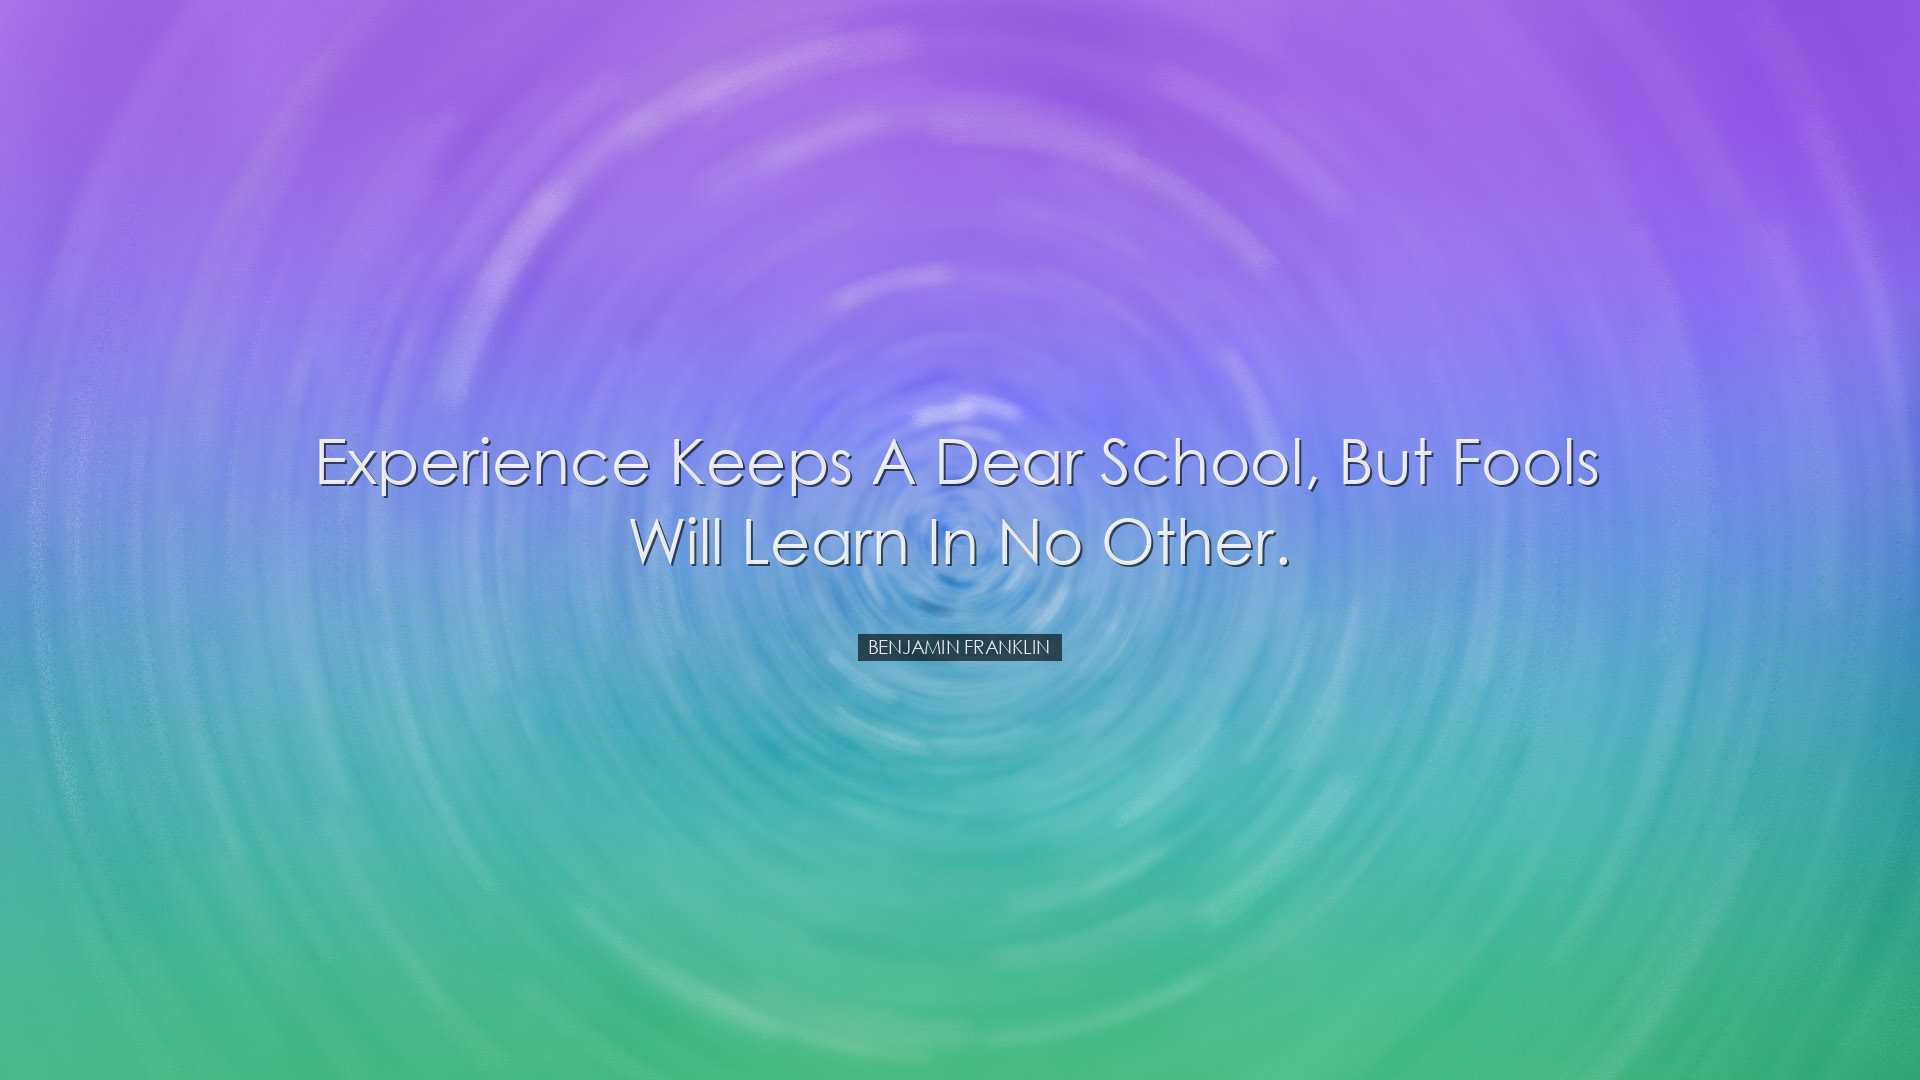 Experience keeps a dear school, but fools will learn in no other.